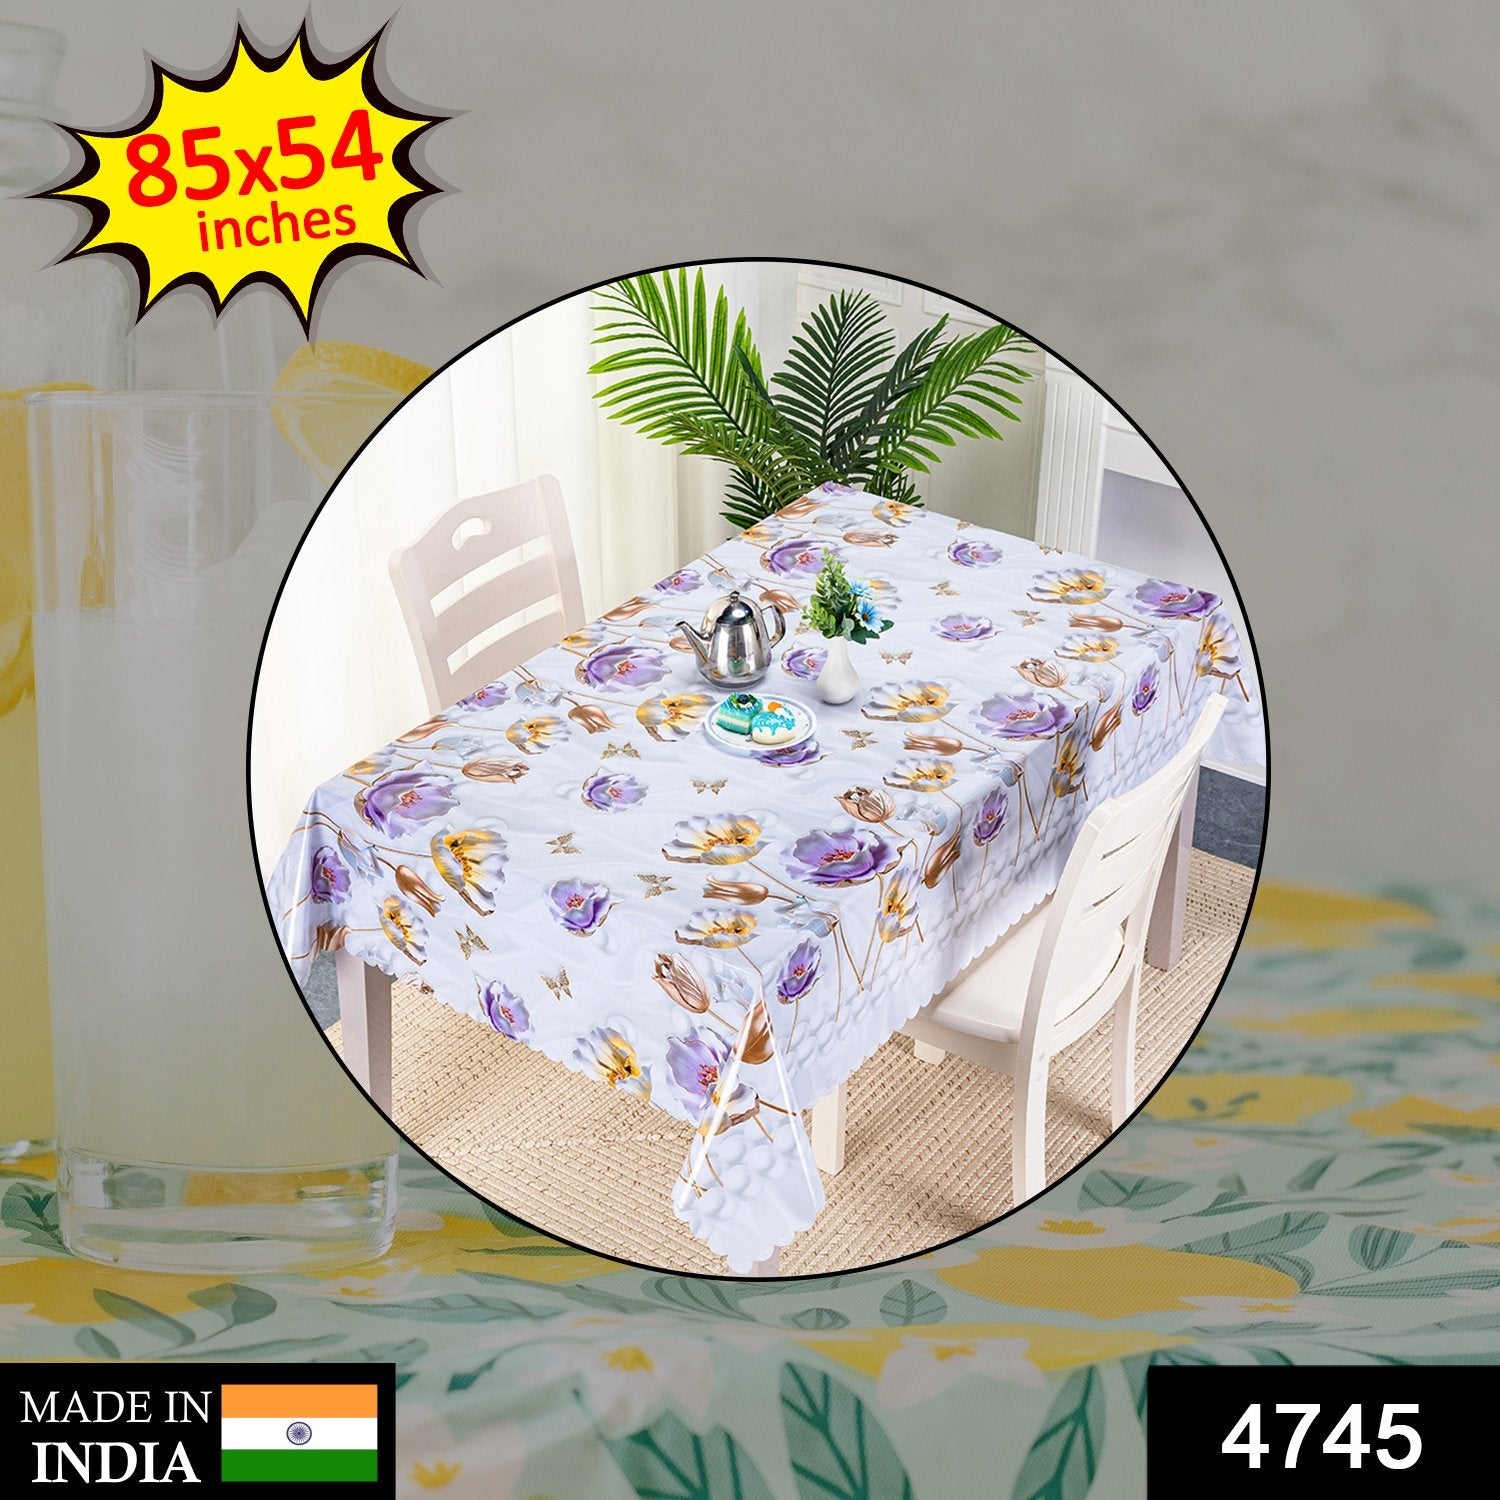 4745 Premium Quality Table cloth For Steal Table (85x54 inch) DeoDap